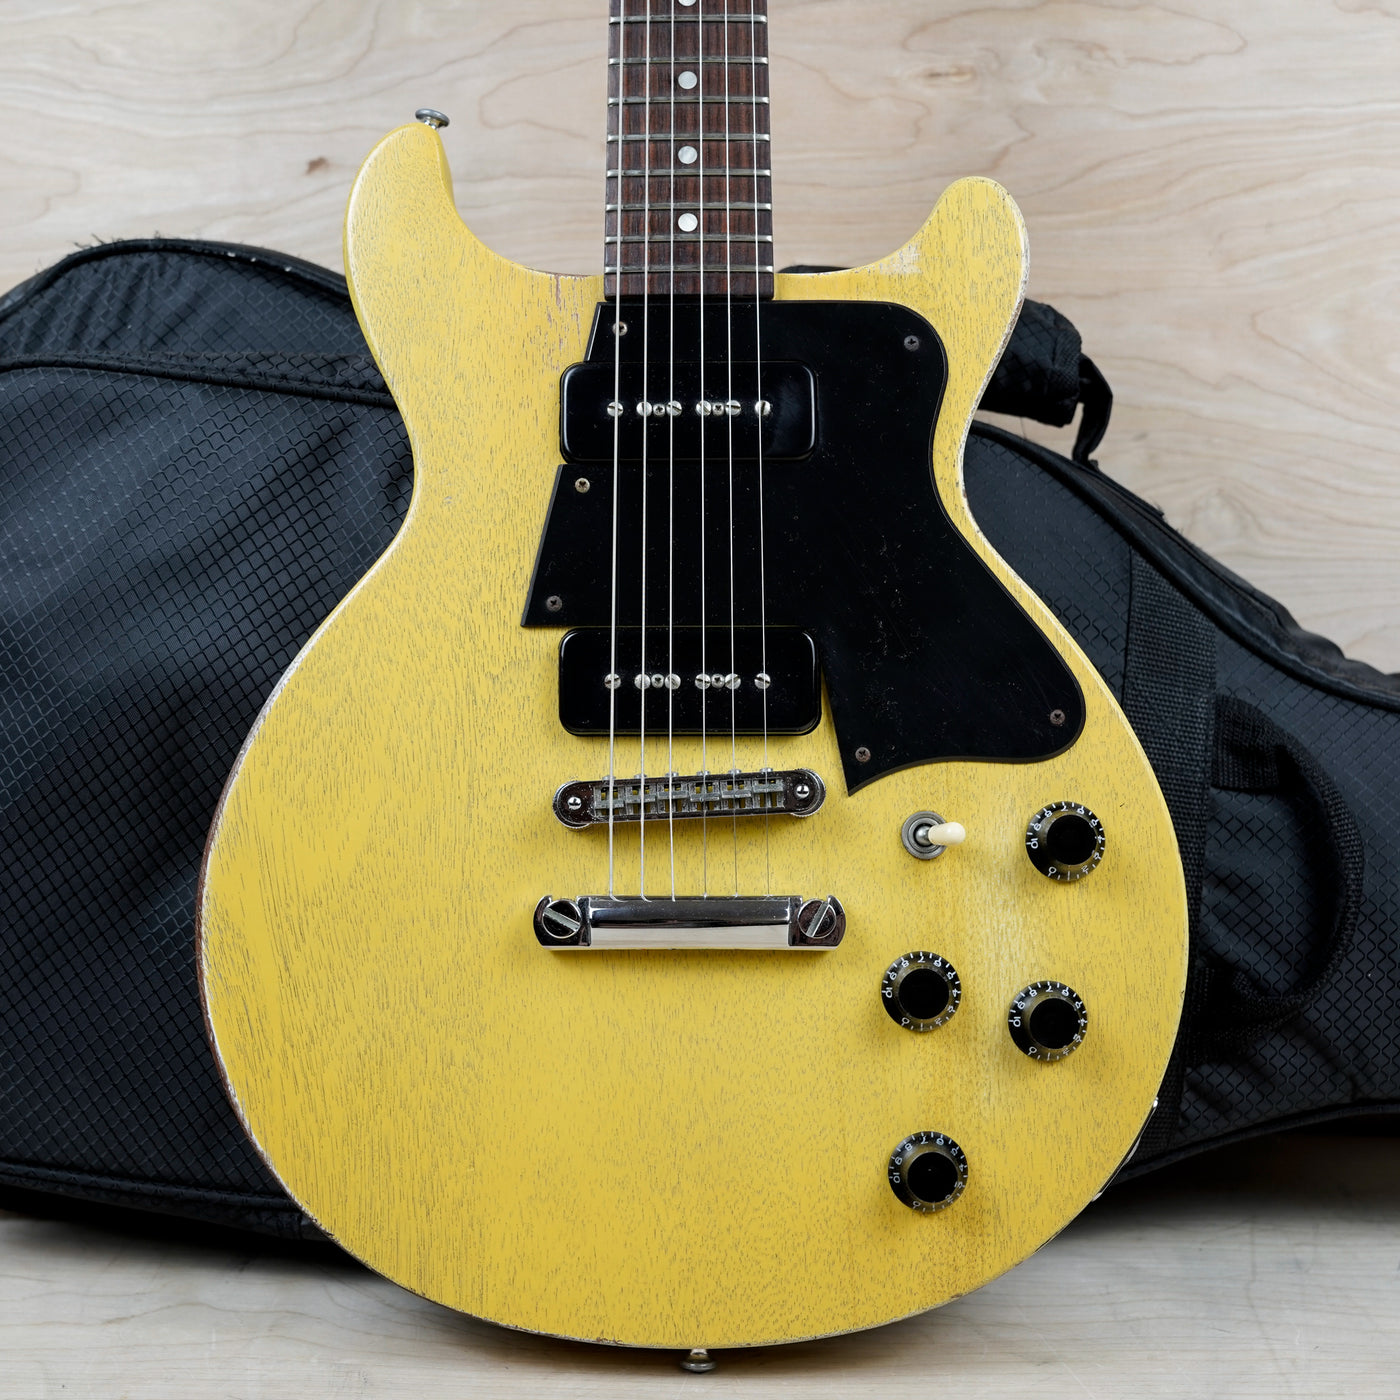 Gibson Les Paul Double Cut Junior Special 2006 Worn TV Yellow Faded DC  w/ Bag